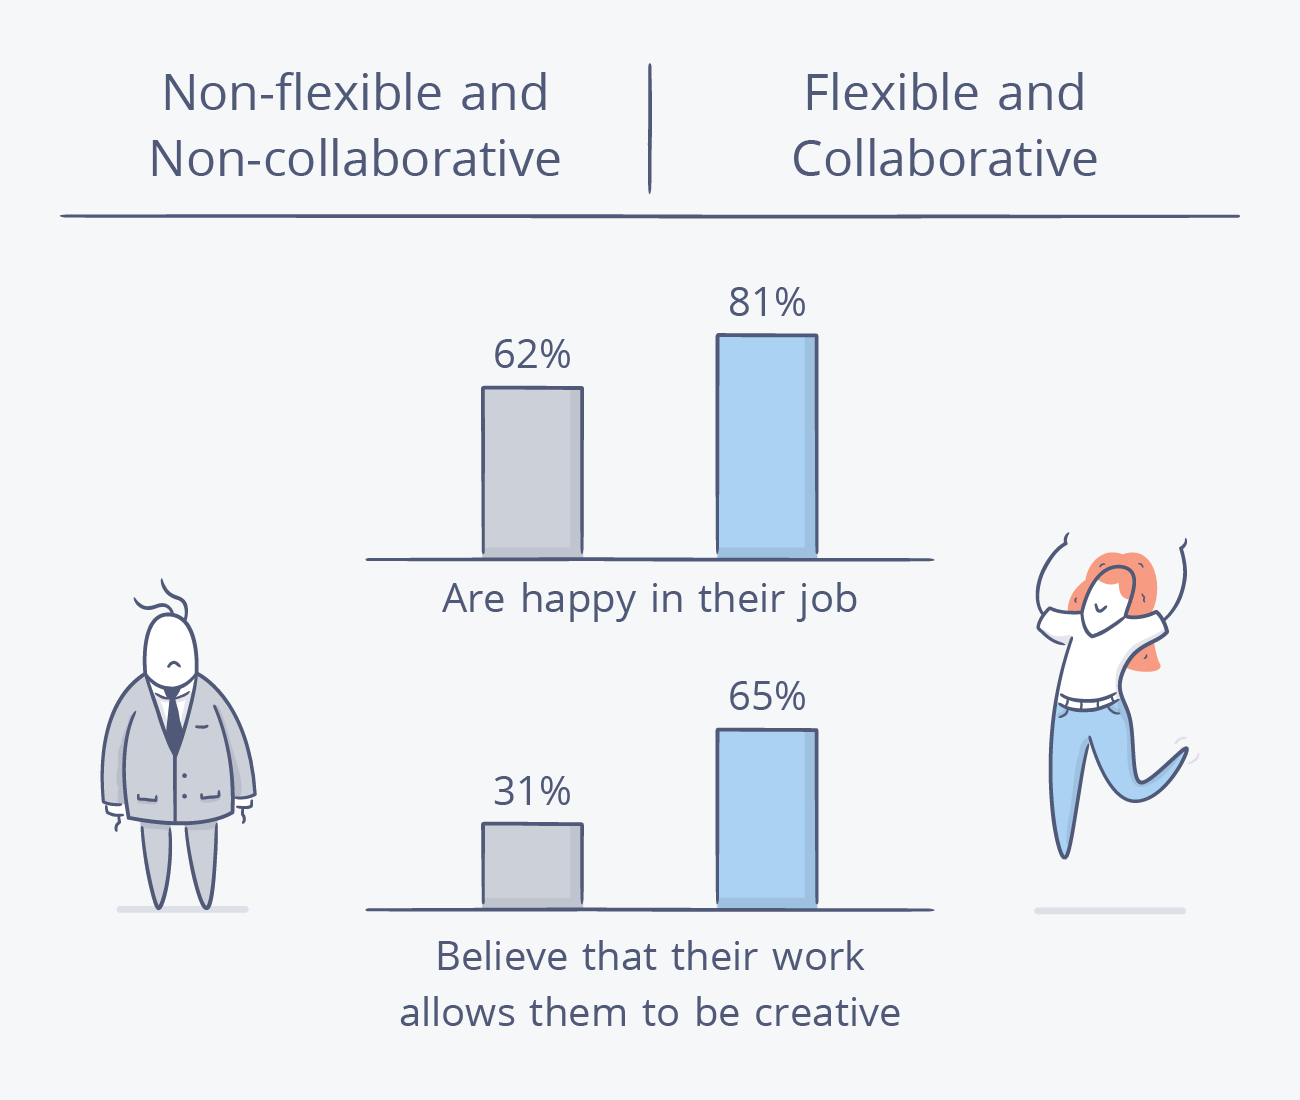 A frowning man standing in a grey suit, and a smiling woman in jeans jumping in the air. Statistics: For "non-flexible and non-collaborative", 62% are happy in their job and 31% believe that their work allows them to be creative. For "flexible and collaborative," 81% are happy in their job, and 65% believe their work allows them to be creative.